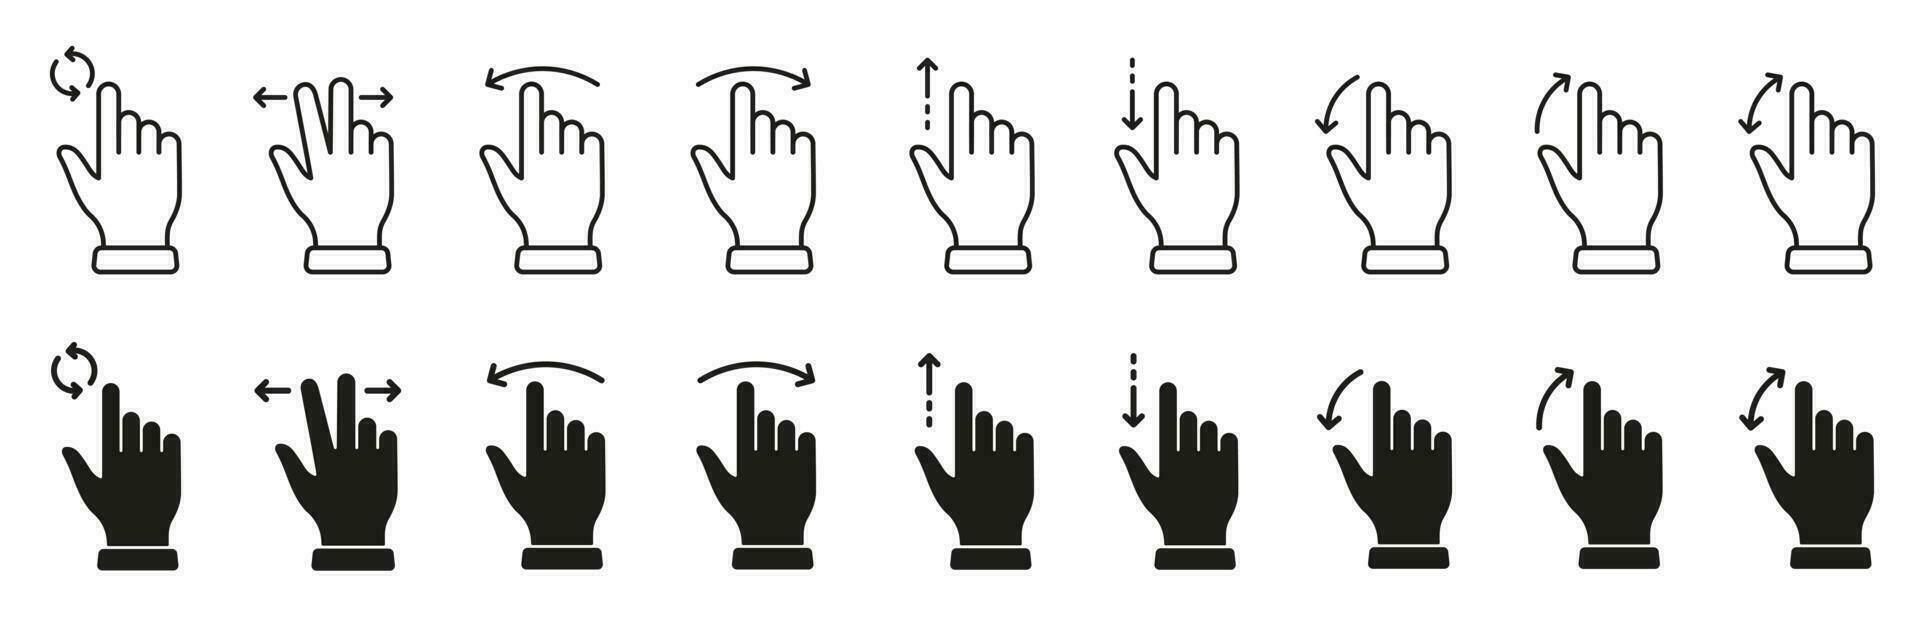 Computer Cursor, Pointer Icon Set. Hand with Finger Digital Mouse Click Line and Silhouette Sign. Website and App Interface, Press, Tap, Link, Choice Button Symbol. Isolated Vector Illustration.